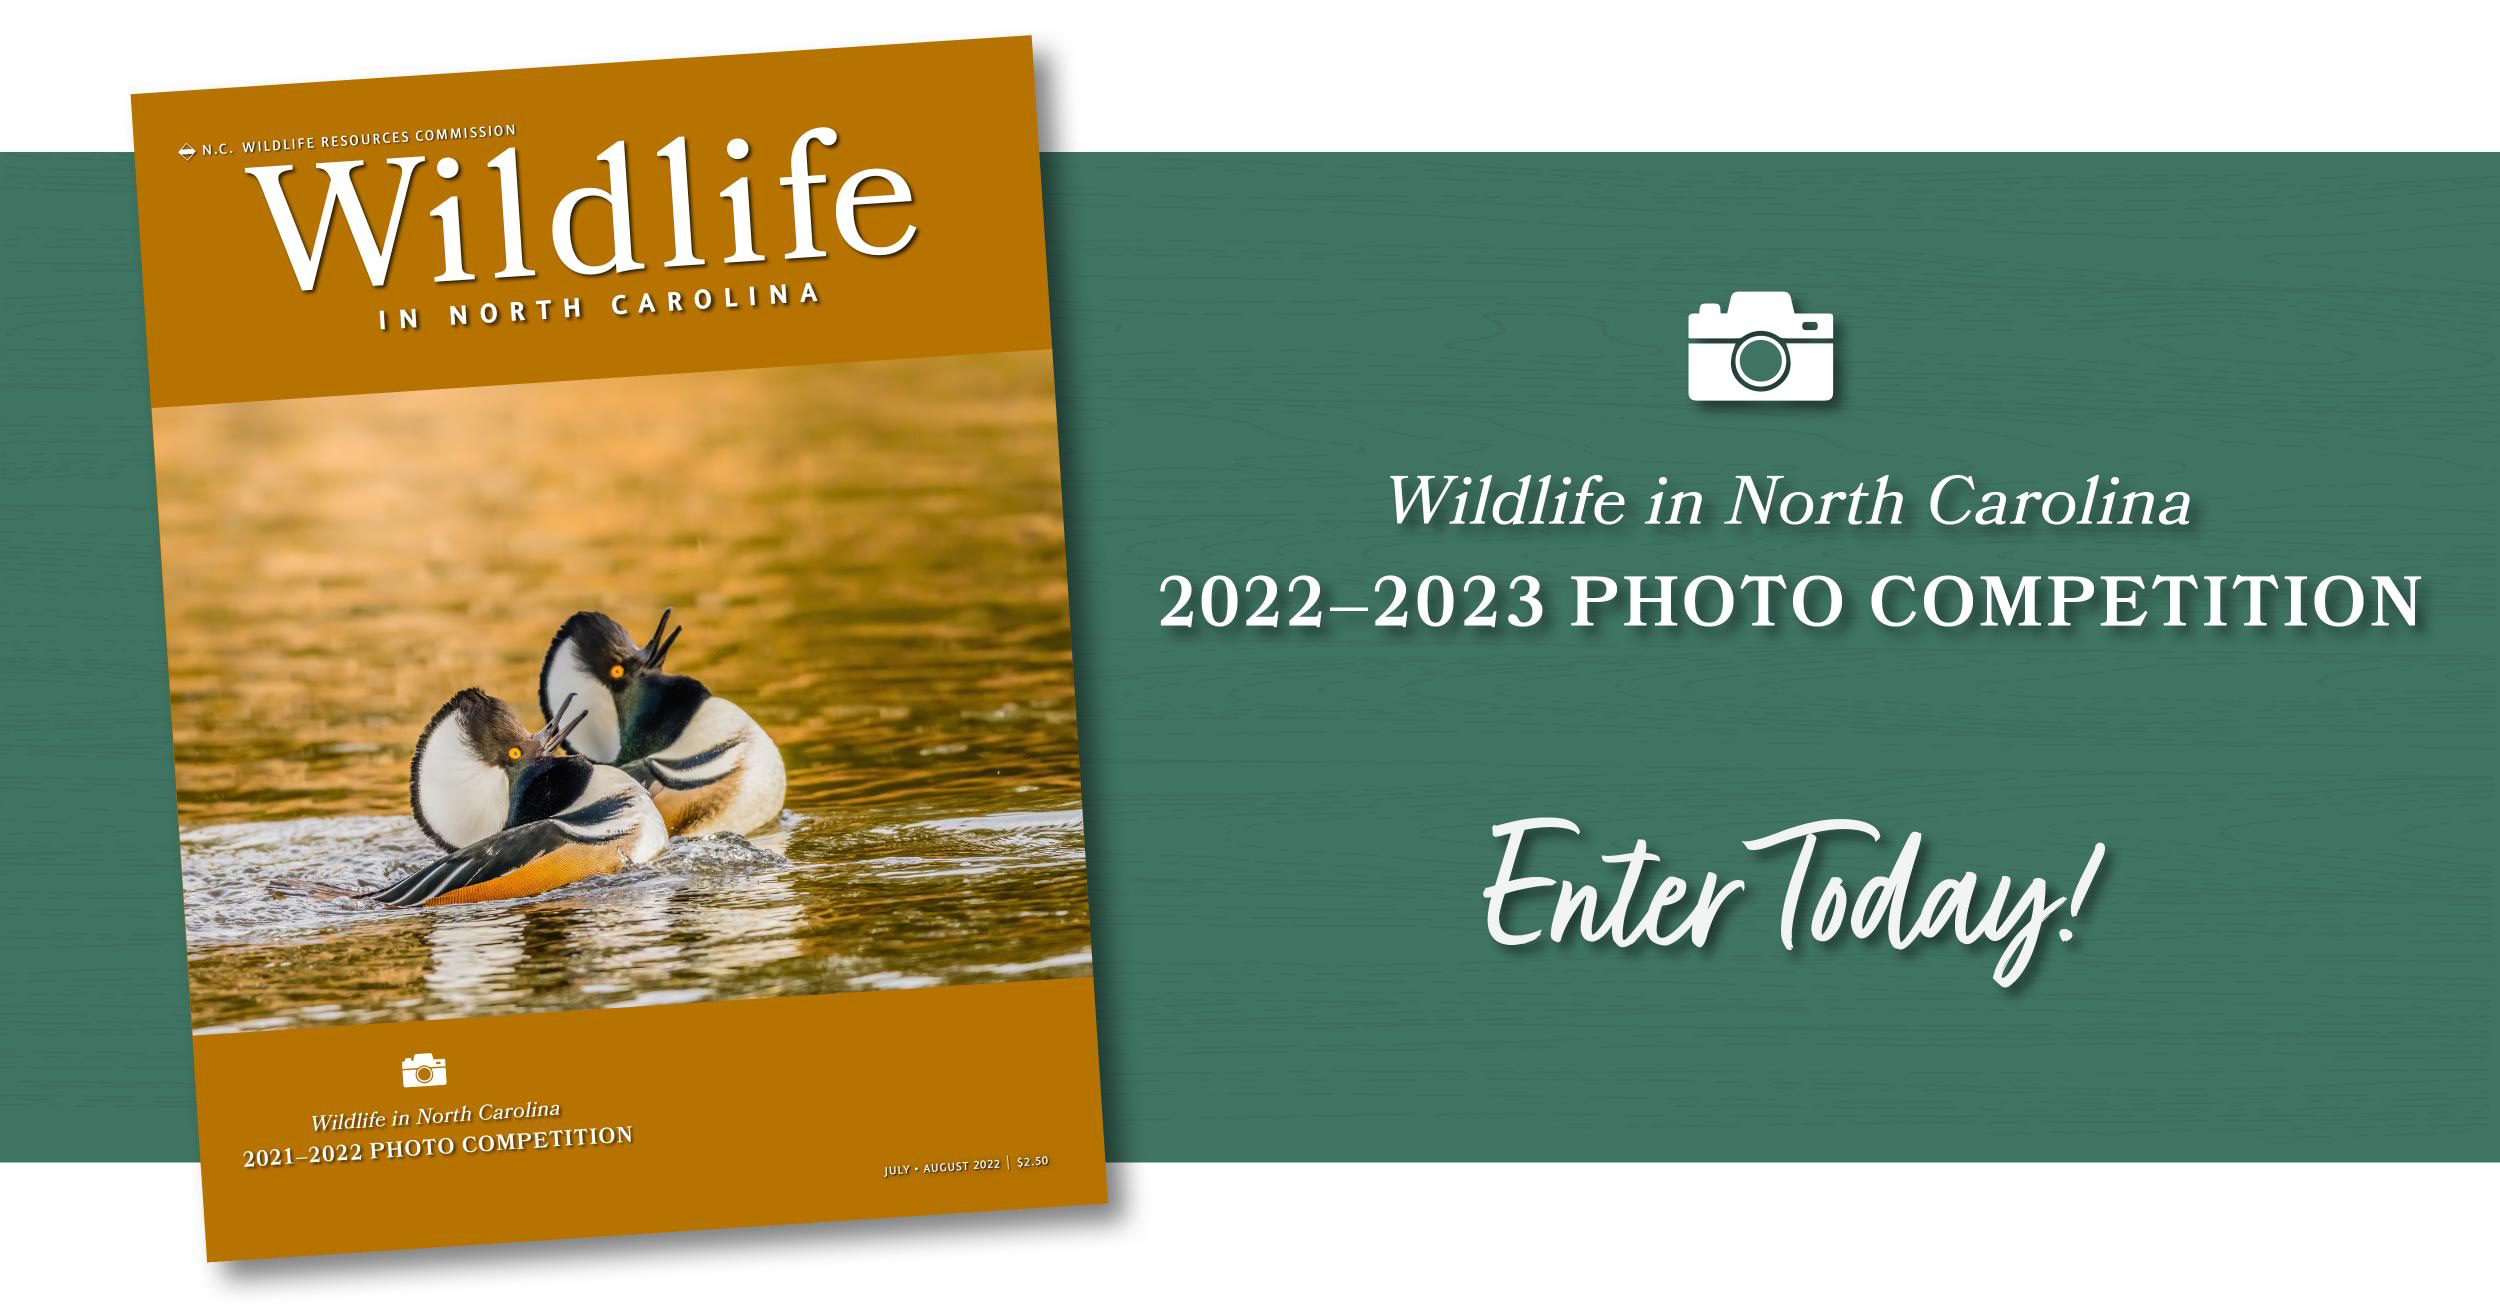 Wildlife in North Carolina 202223 Photo Competition Announced N.C